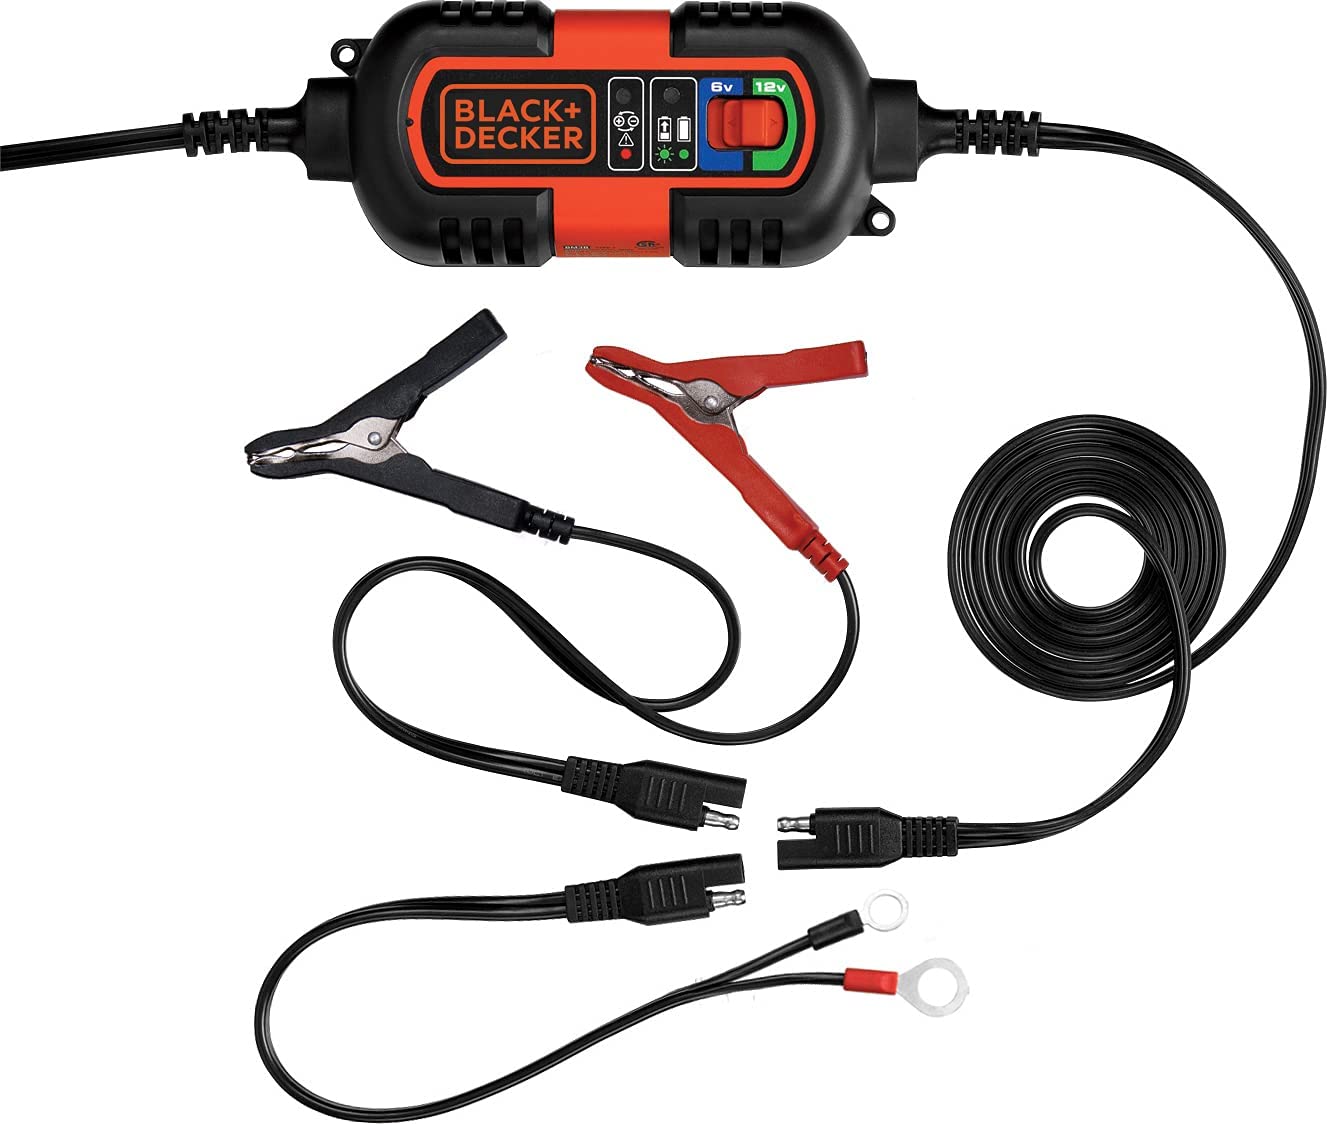  BLACK+DECKER BC15BD Fully Automatic 15 Amp 12V Bench Battery  Charger/Maintainer with 40A Engine Start, Alternator Check, Cable Clamps :  Automotive